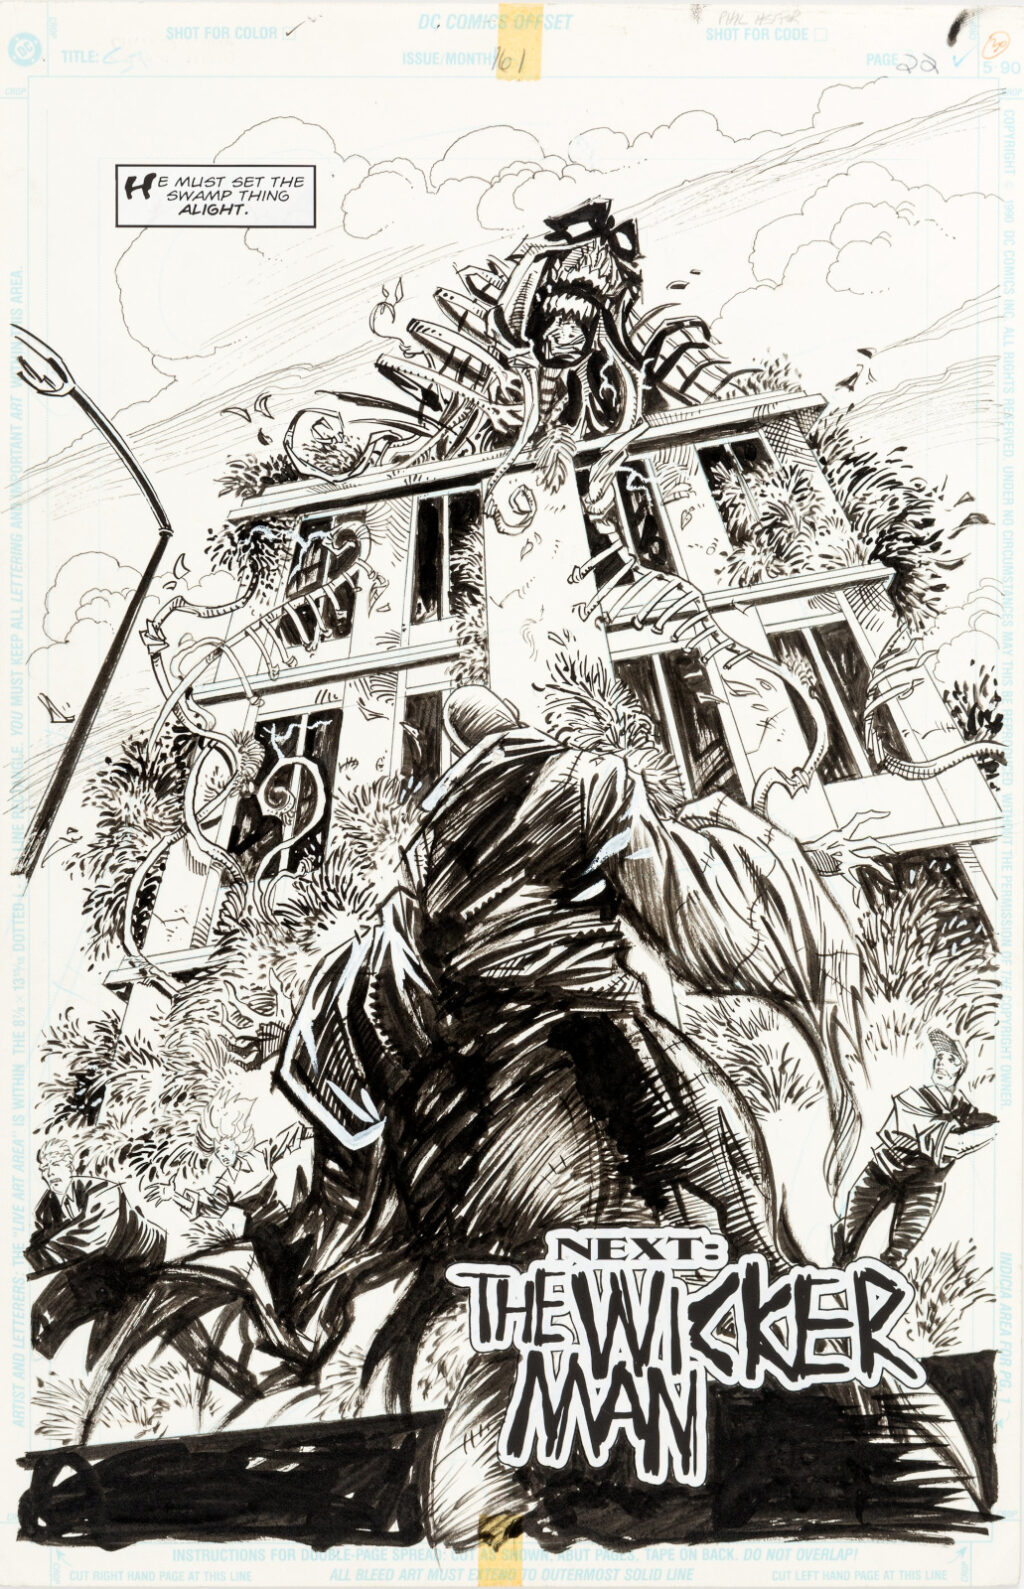 Swamp Thing issue 161 page 22 by Phil Hester and Kim DeMulder